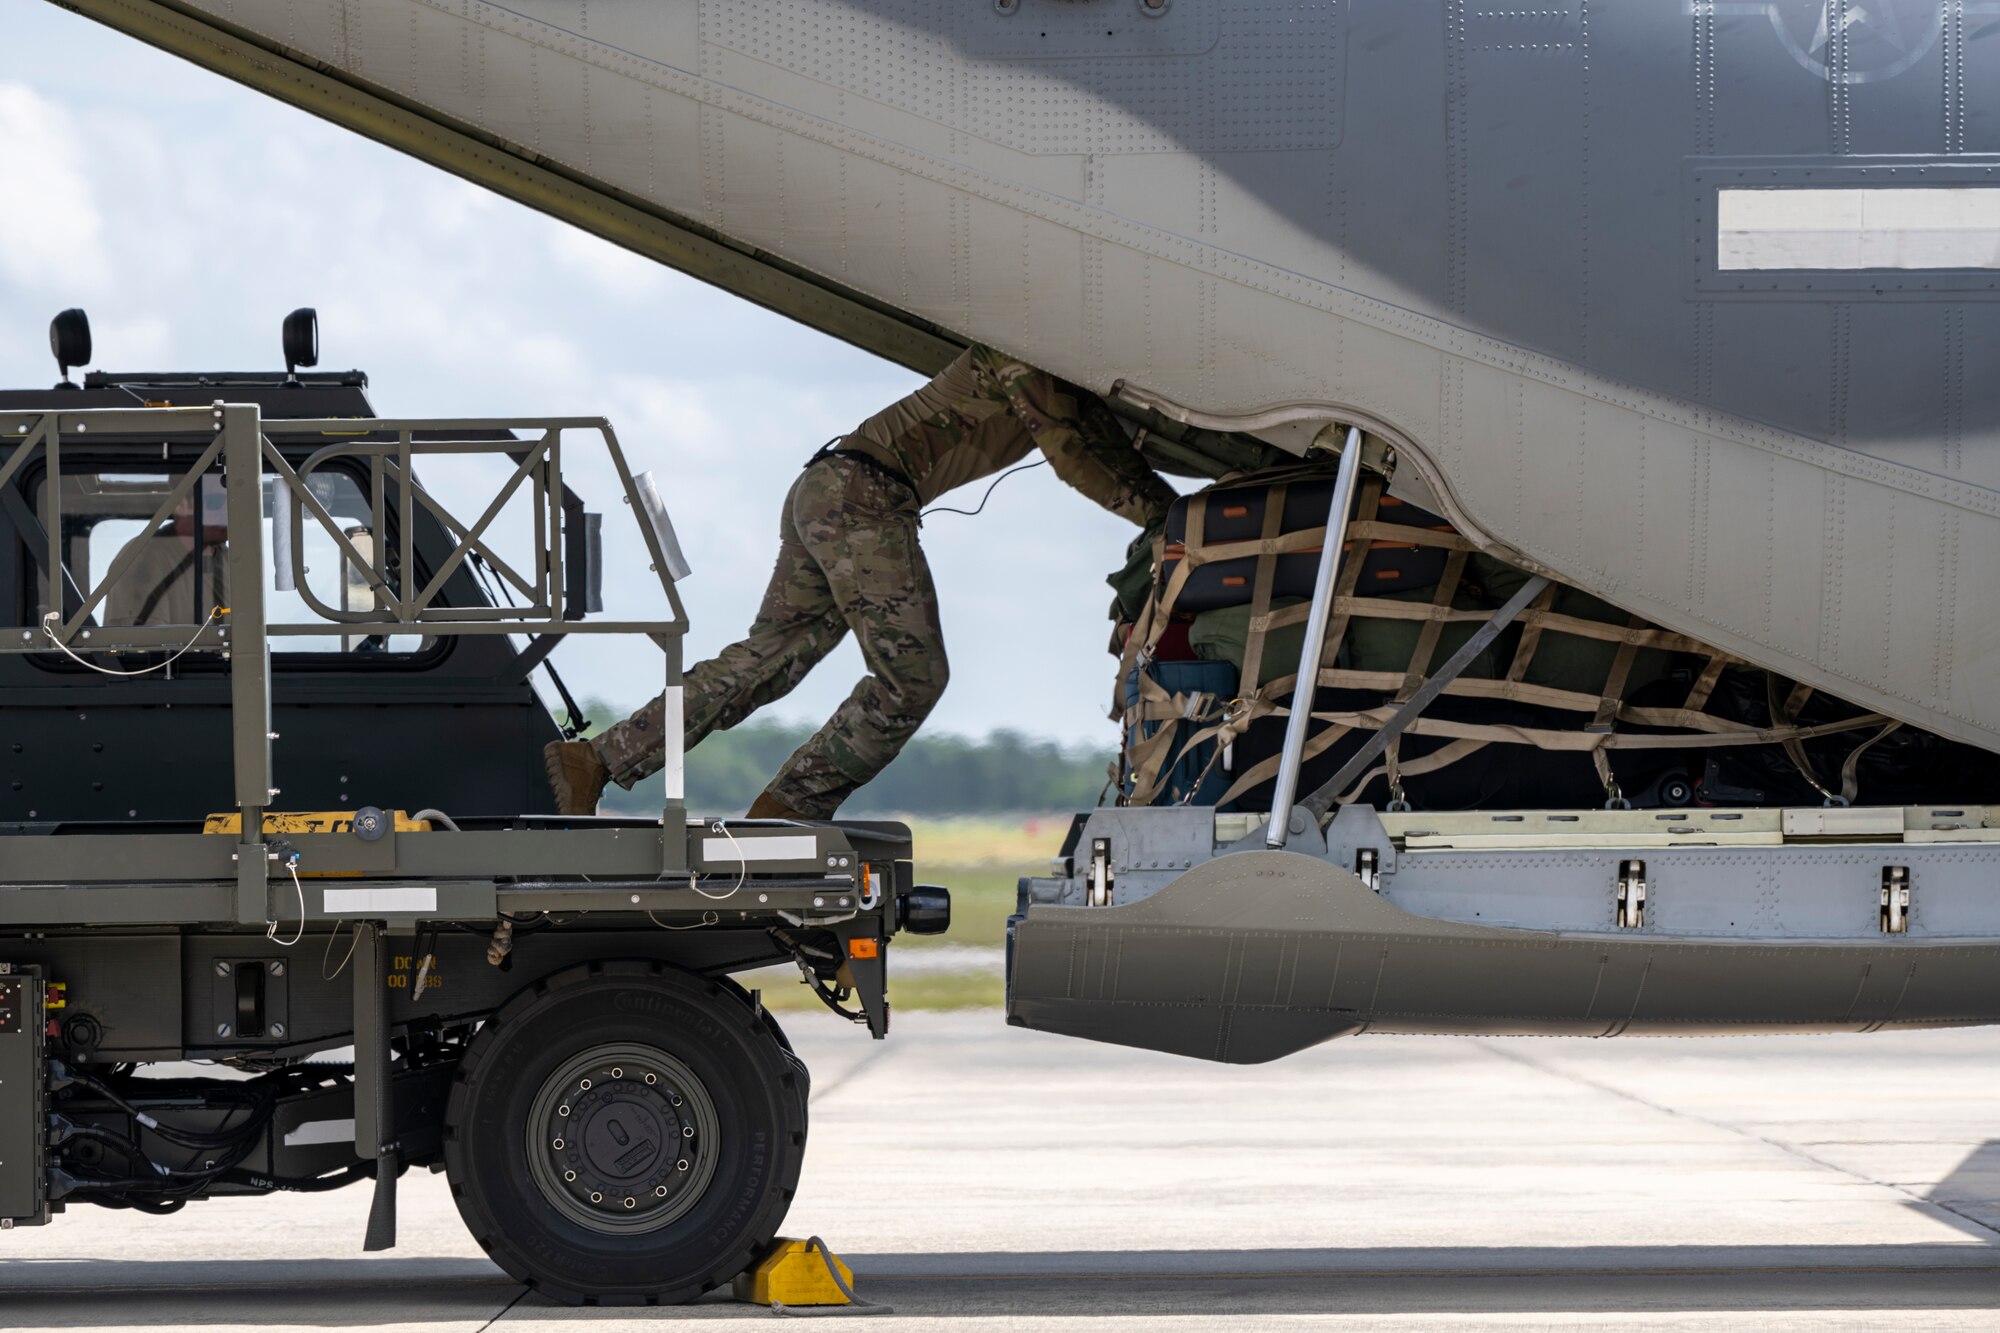 A U.S. Air Force loadmaster assigned to the 71st Rescue Squadron prepares to load cargo onto an HC-130J Combat King II during Exercise Ready Tiger 24-1 from Moody Air Force Base, Georgia, April 10, 2024. A loadmaster's duties include mathematically preplanning the correct placement of the load on the airplane, providing passenger comfort and safety, securing cargo and taking part in airdrop operations. Ready Tiger 24-1 is a readiness exercise demonstrating the 23rd Wing’s ability to plan, prepare and execute operations and maintenance to project air power in contested and dispersed locations, defending the United States’ interests and allies. (U.S. Air Force photo by Senior Airman Deanna Muir)